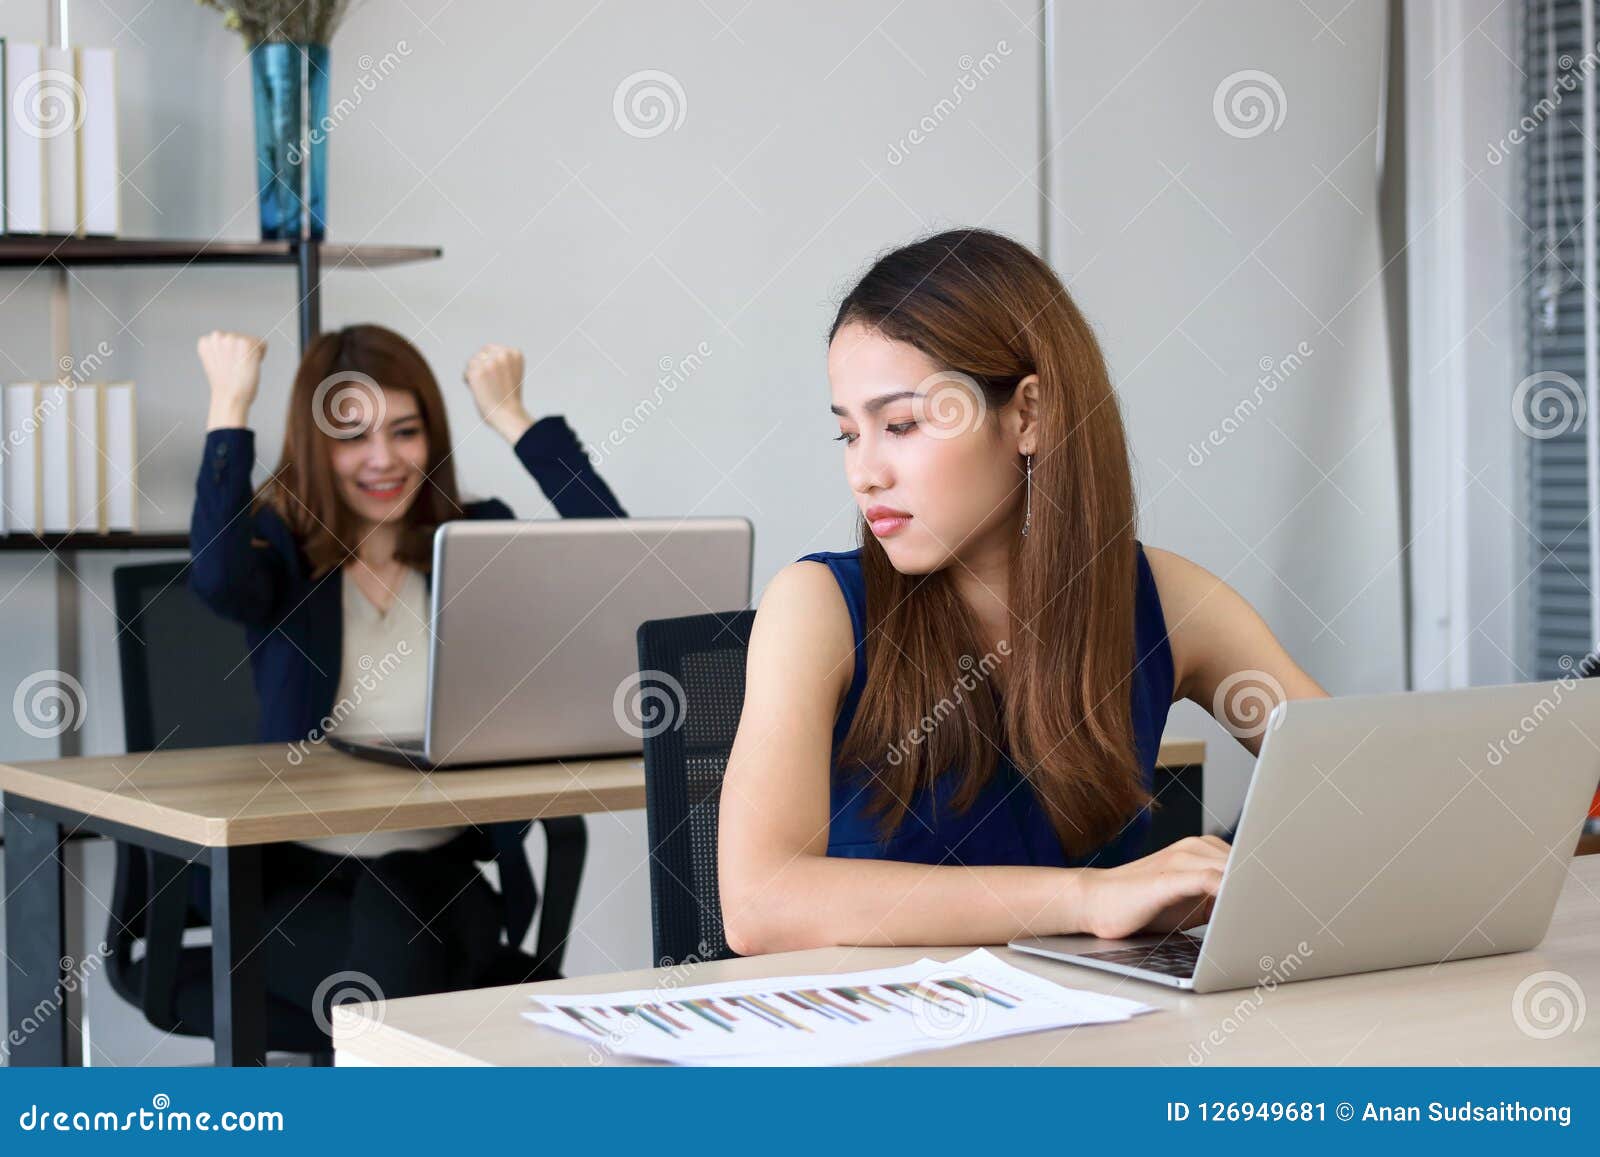 angry envious asian business woman looking successful competitor colleague in office.